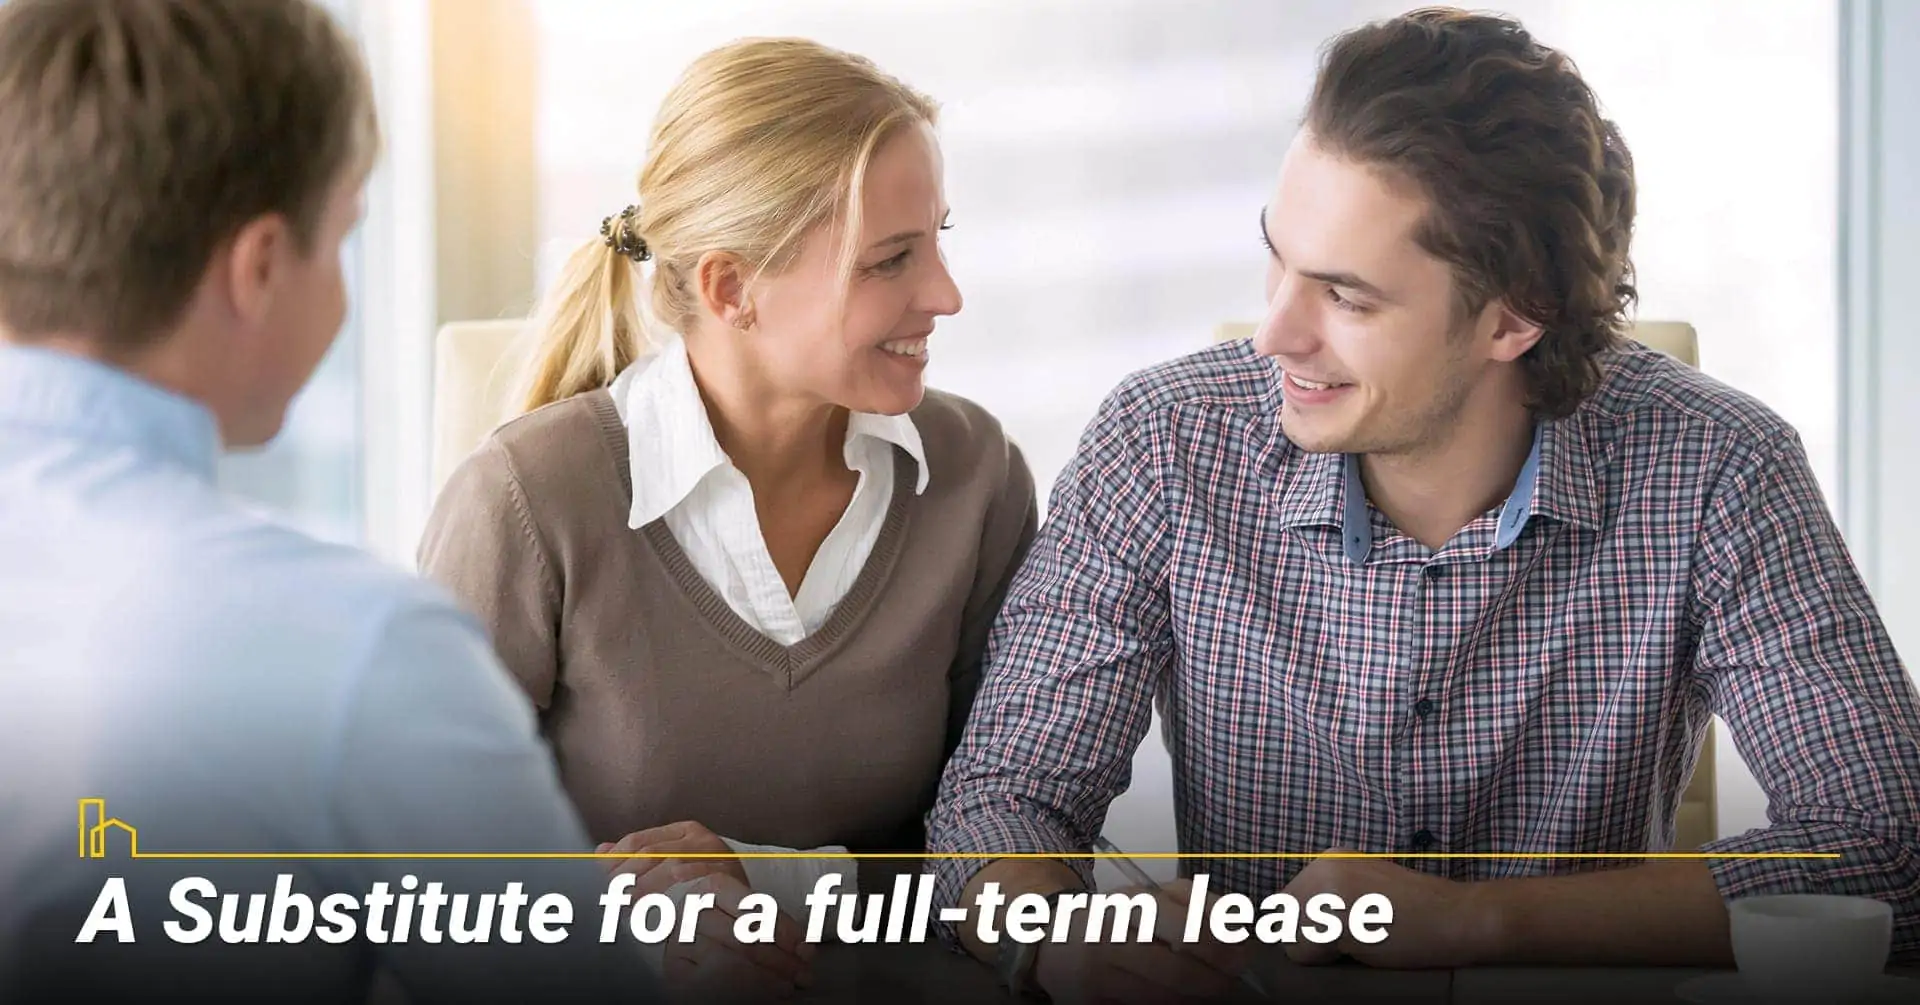 A Substitute for a full-term lease, leasing options